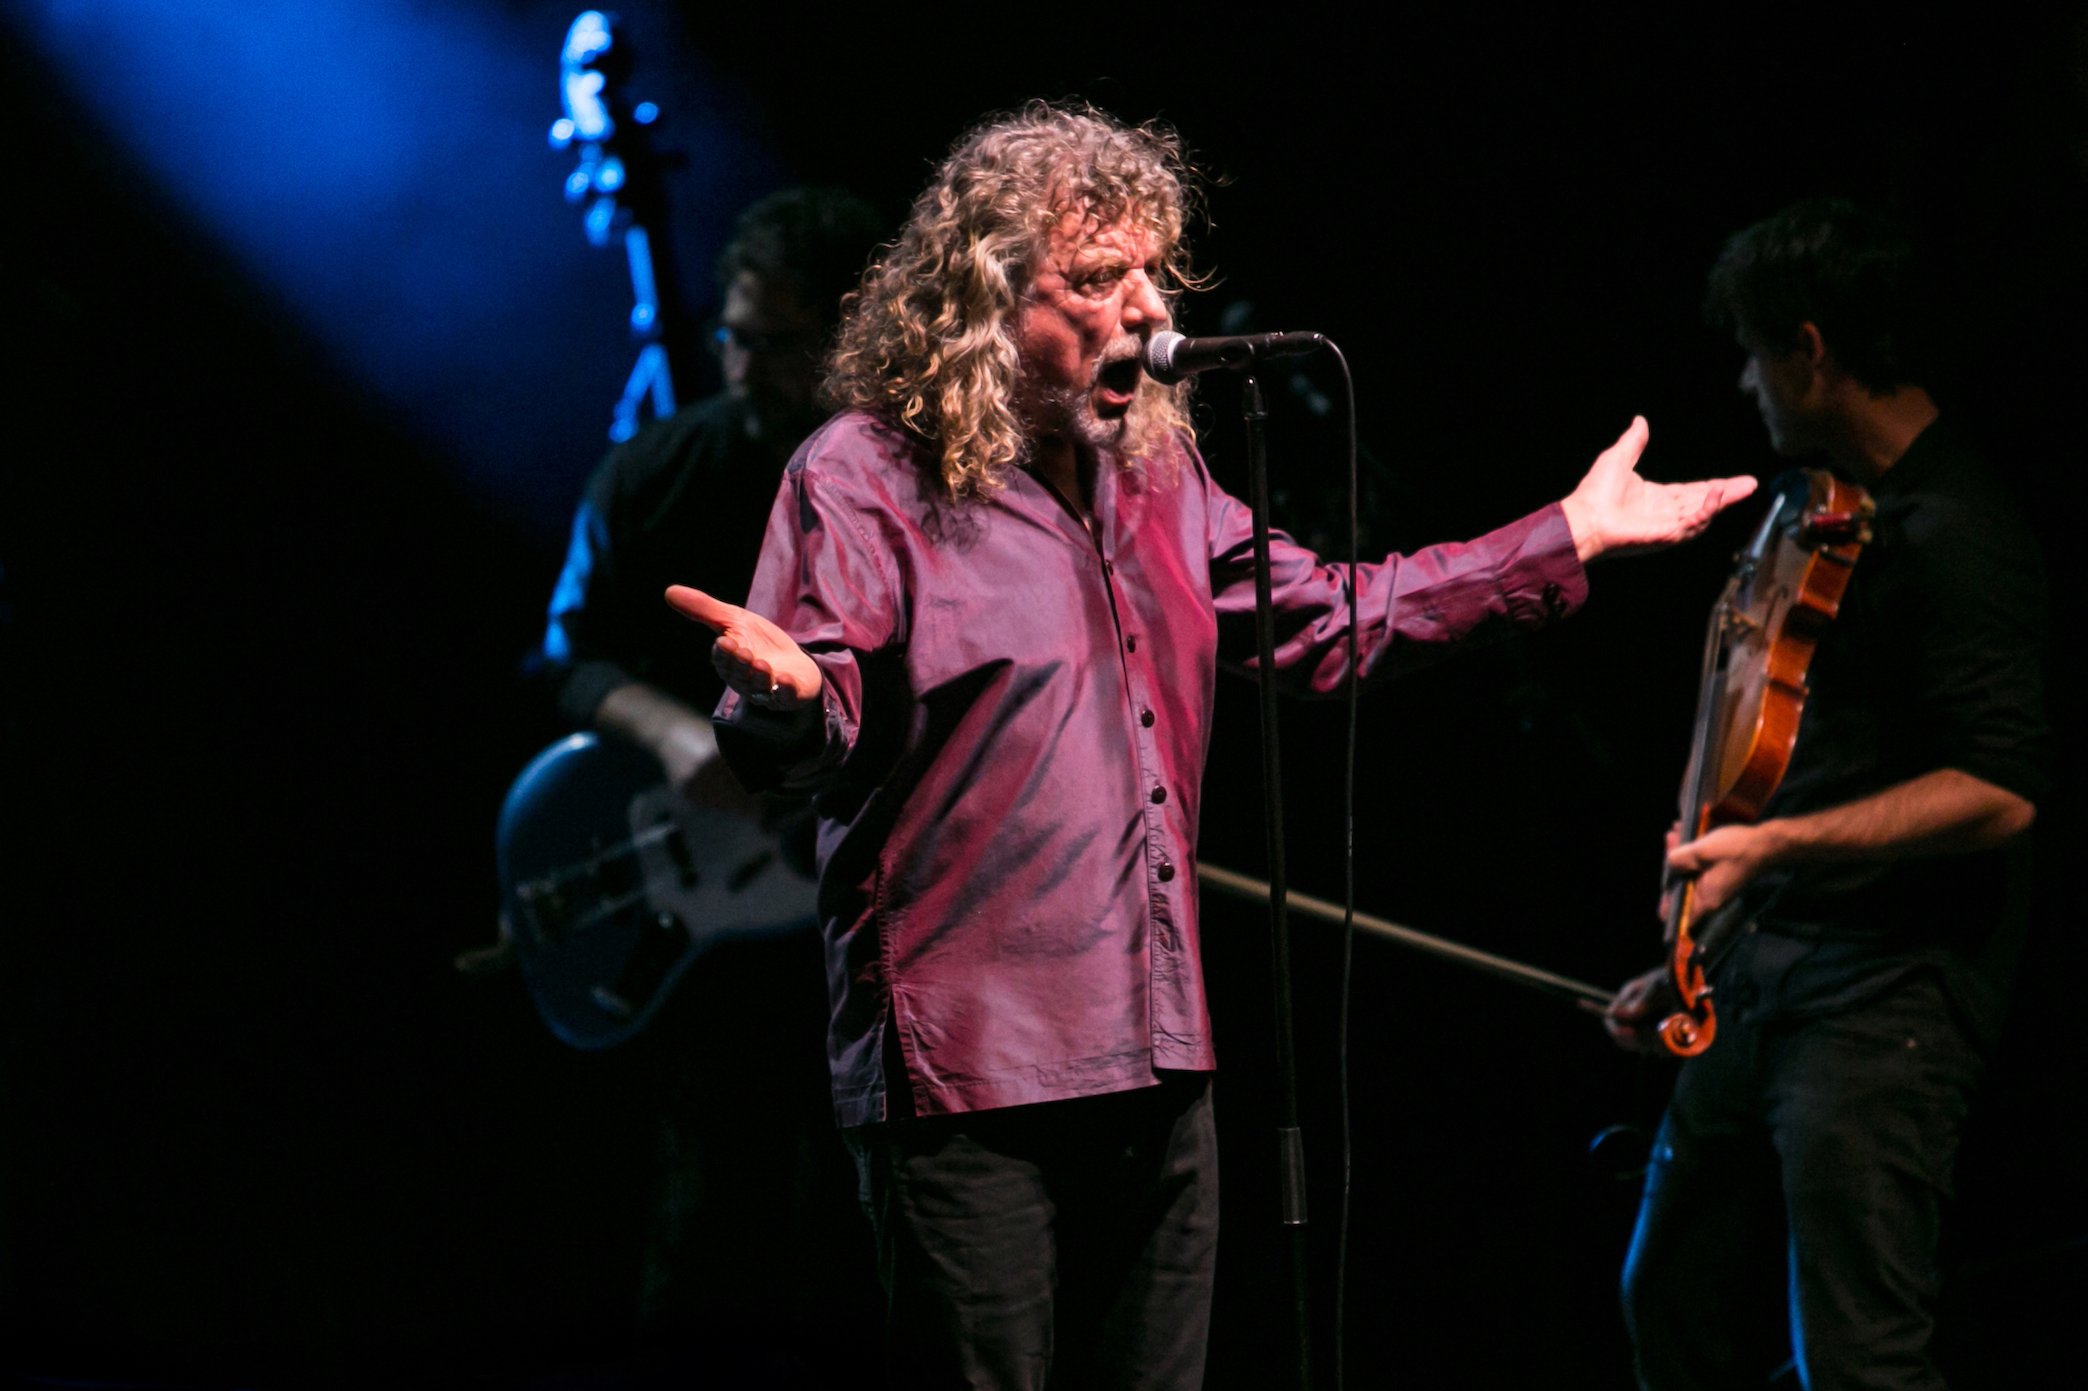 Robert Plant of Led Zeppelin performs at Wales Millennium Centre in Cardiff, Wales